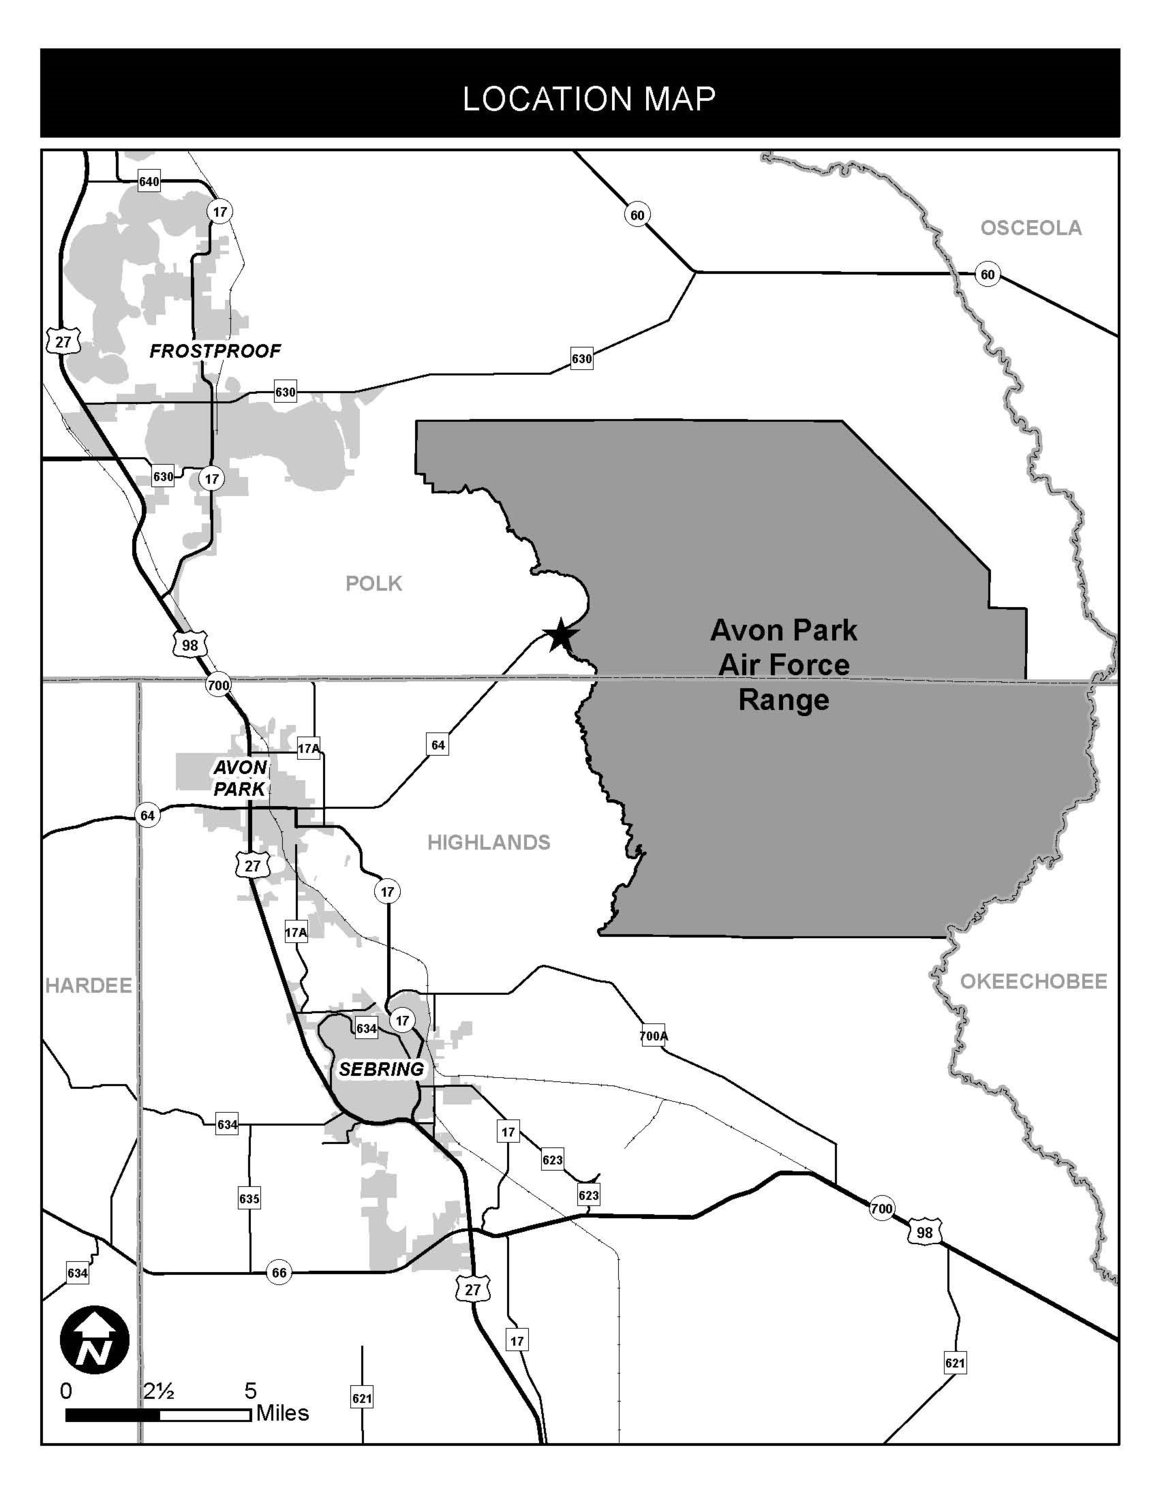 This map shows the location of the Avon Park Air Force Range in Avon Park.